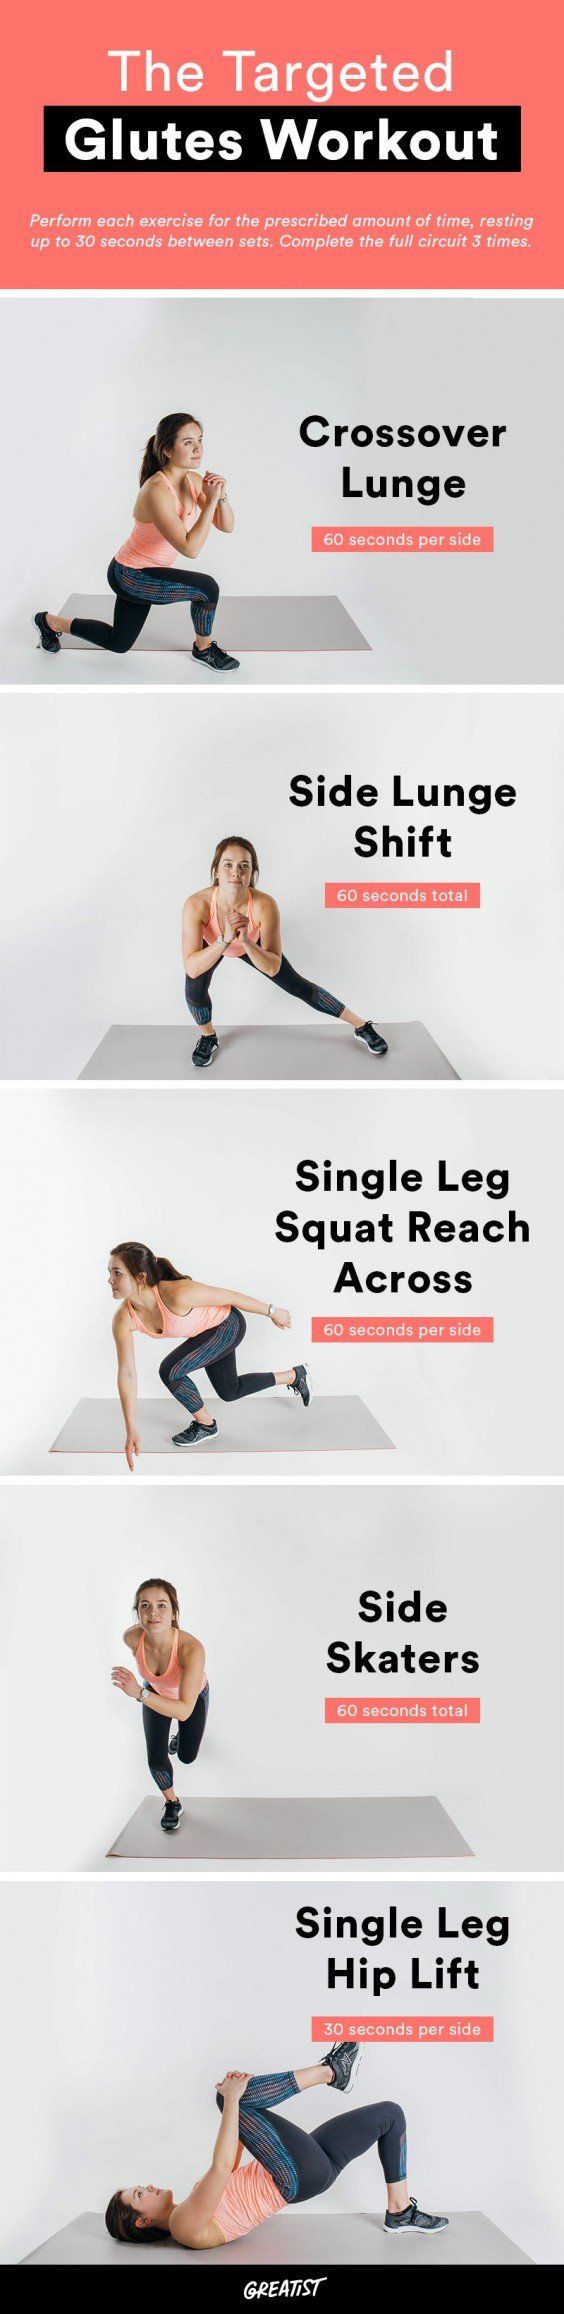 Exercises for the butt